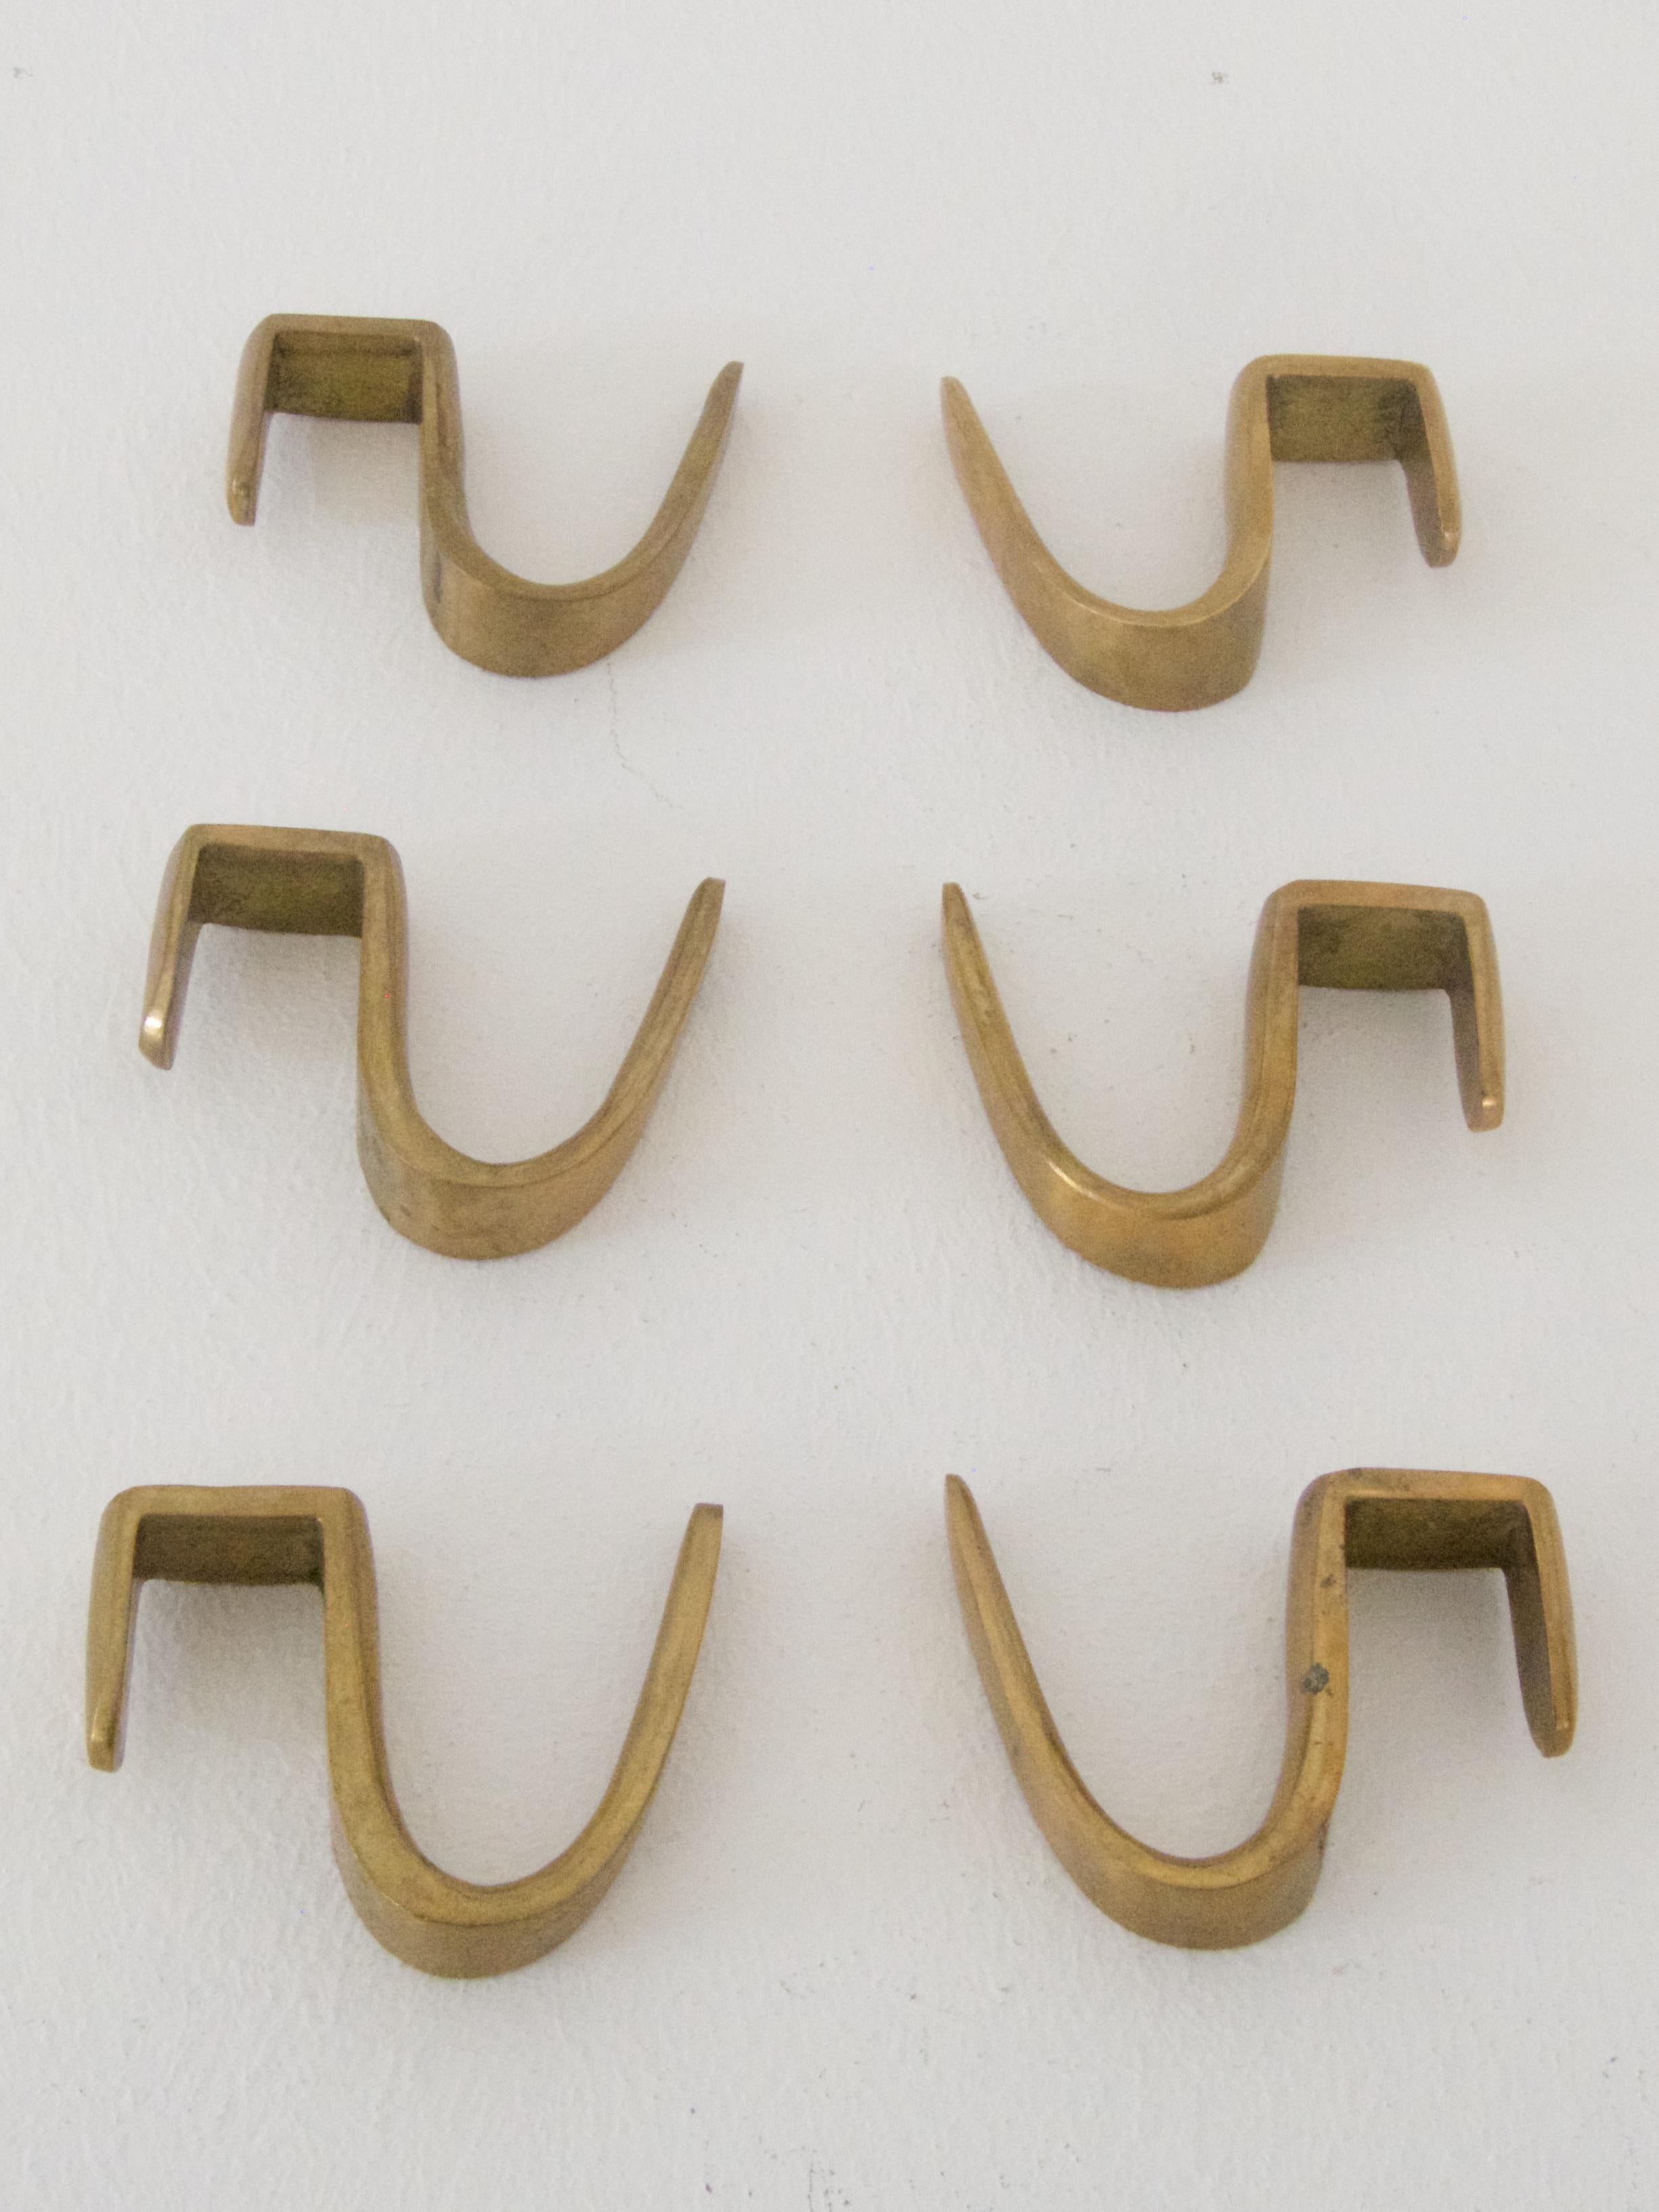 Six vintage brass coat hooks 
designed in the 1960s by C. Auboeck

Additional hooks for the Carl Auböck coat rack.

Nice patina!